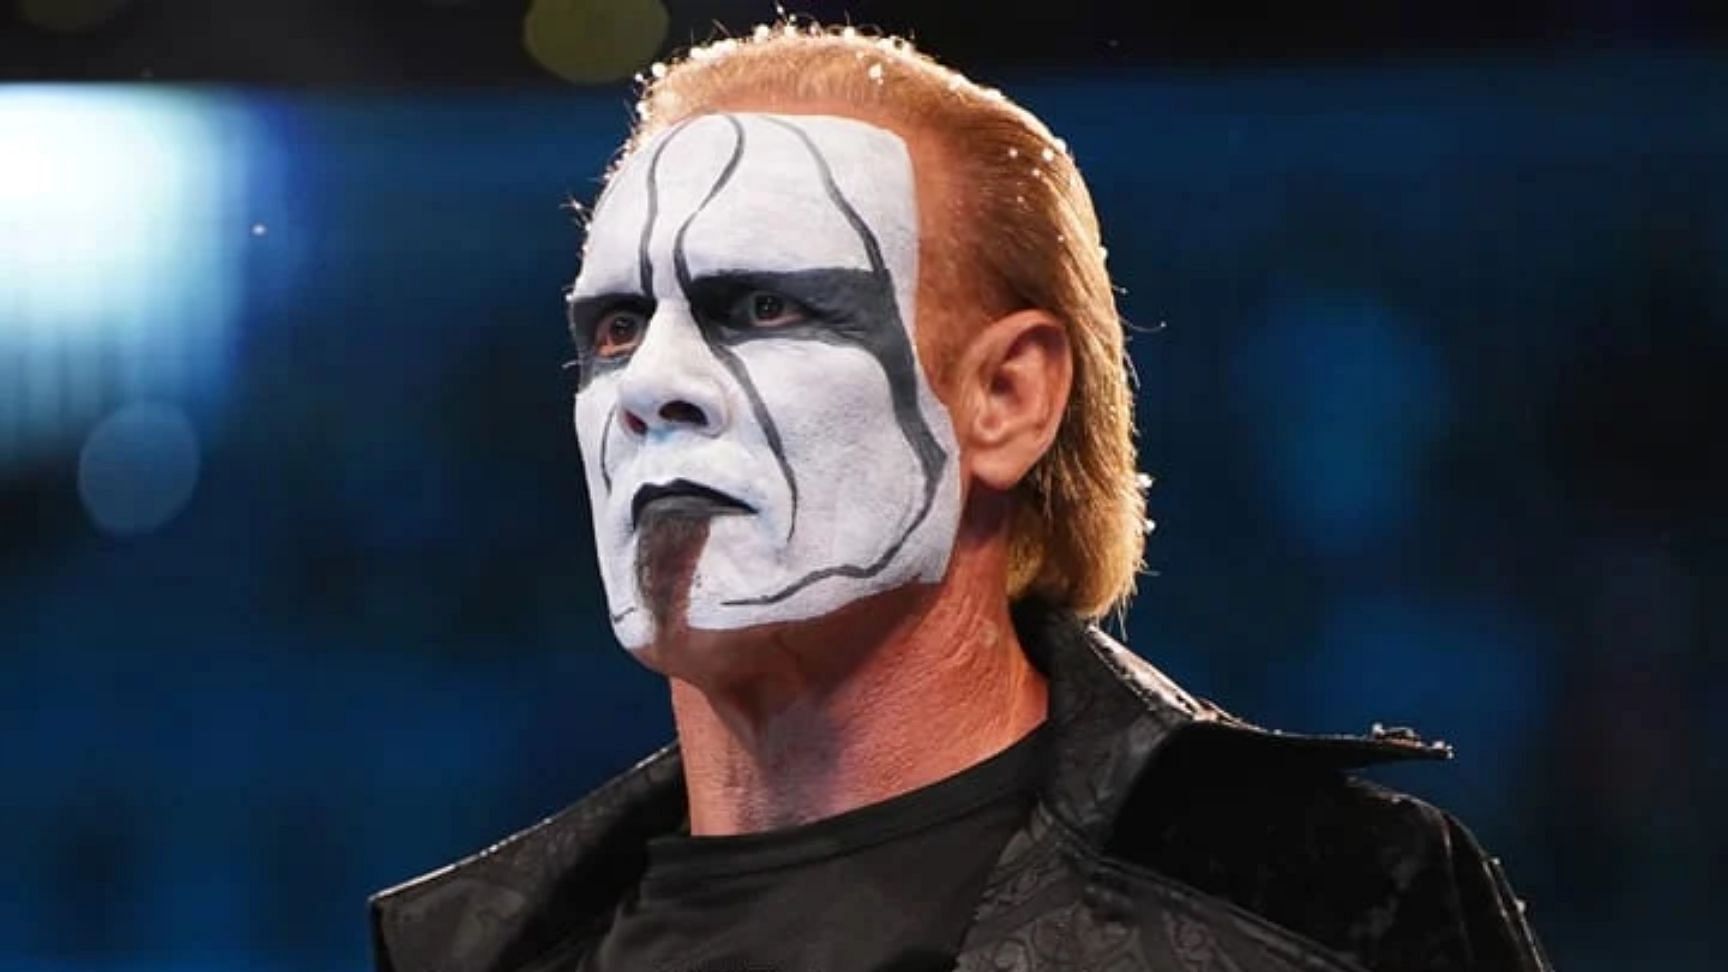 Sting is one of the most iconic pro wrestlers of all time